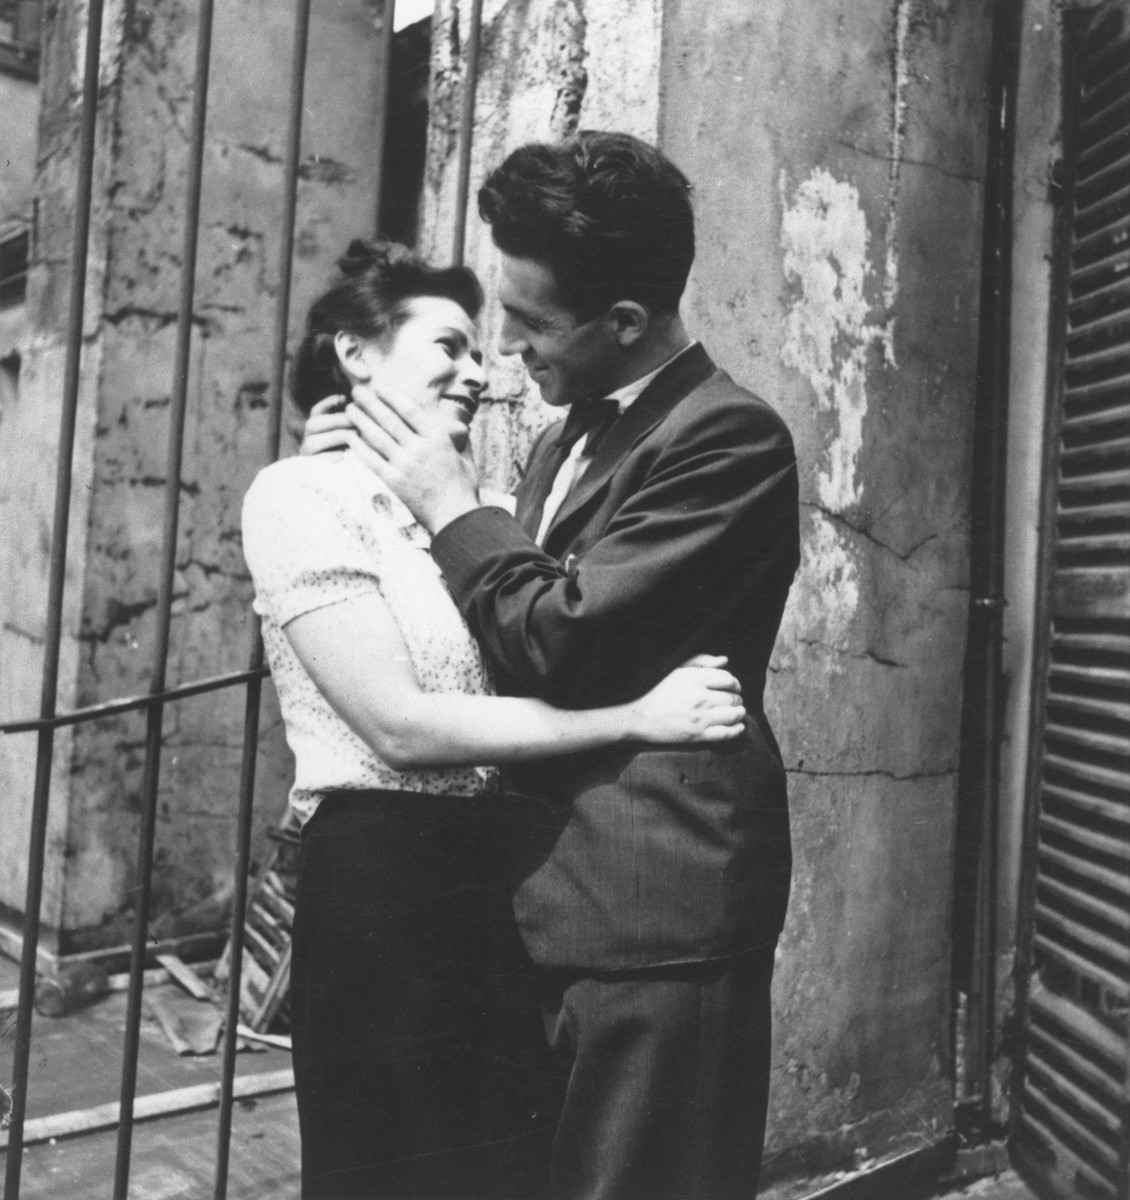 Bill Freier (Willi Spira) embraces his fiancee, Mina.

The caption on the verso of the photograph reads, "Bill Spira with his beloved Mina."